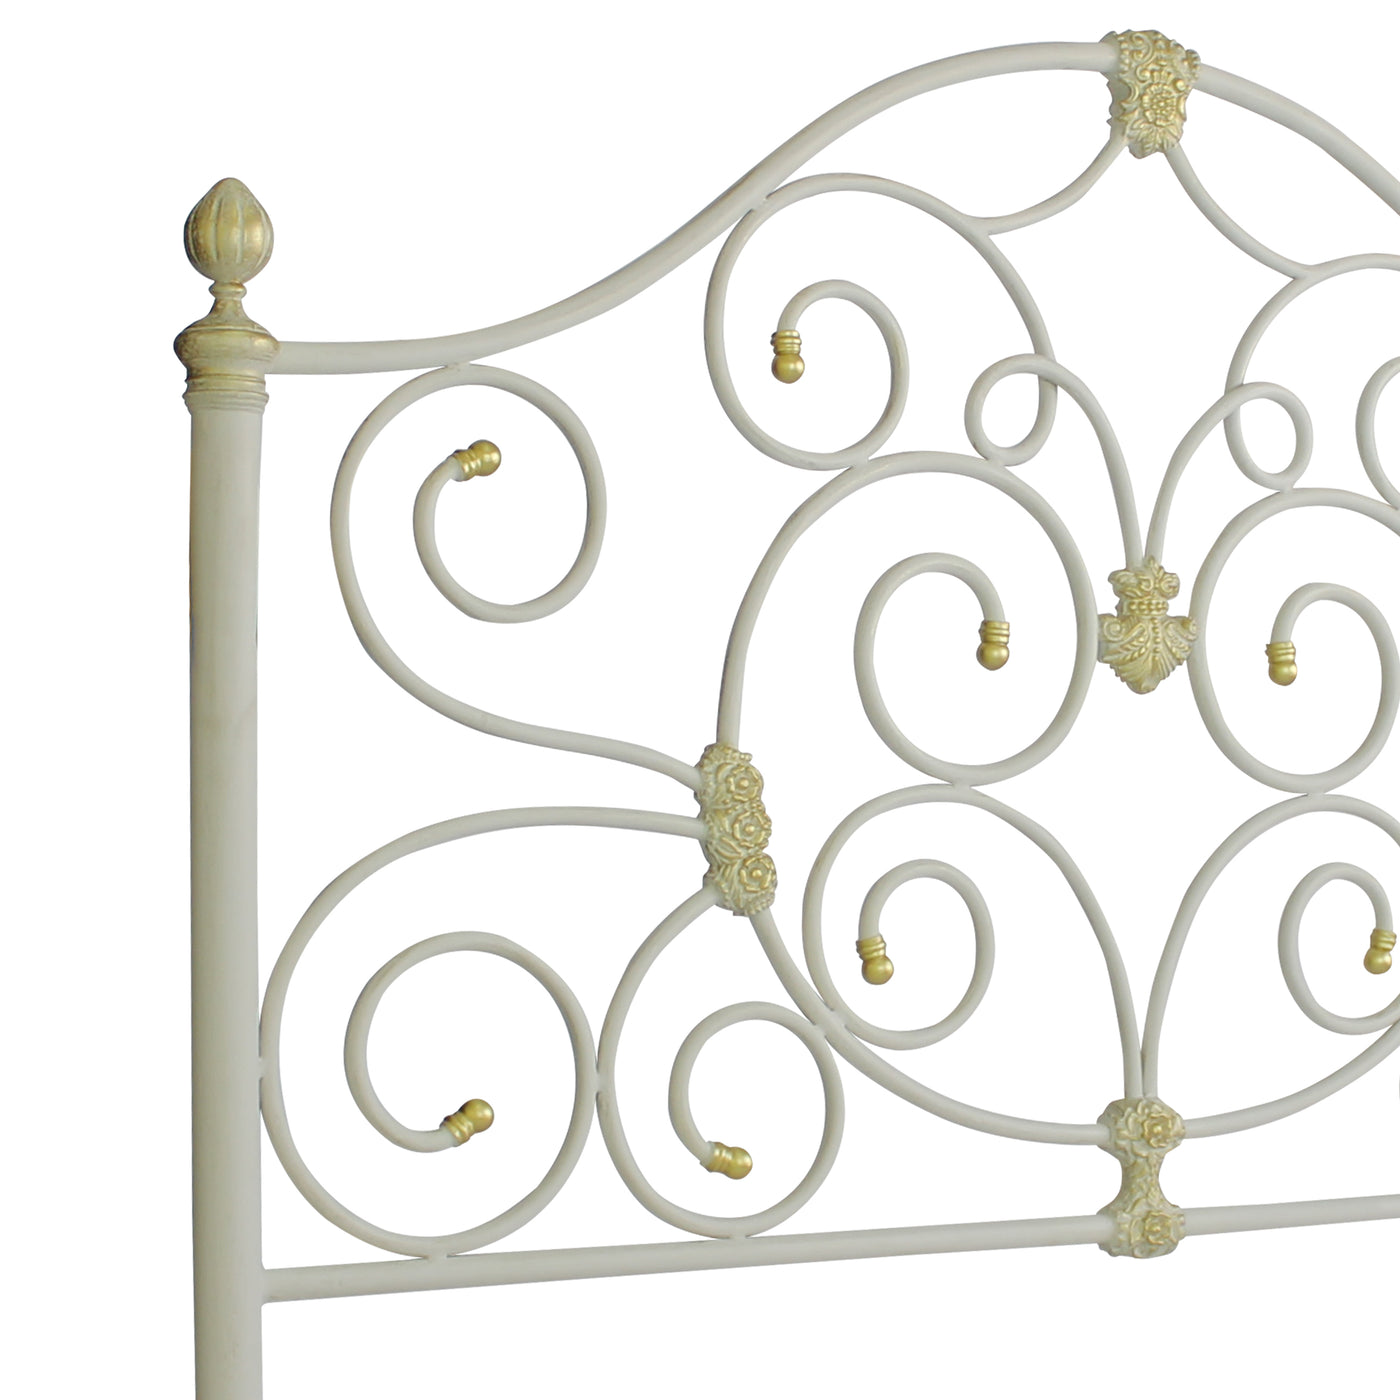 Close up of a wrought iron headboard for a single bed with scrolls and classical motifs, painted in white and gold